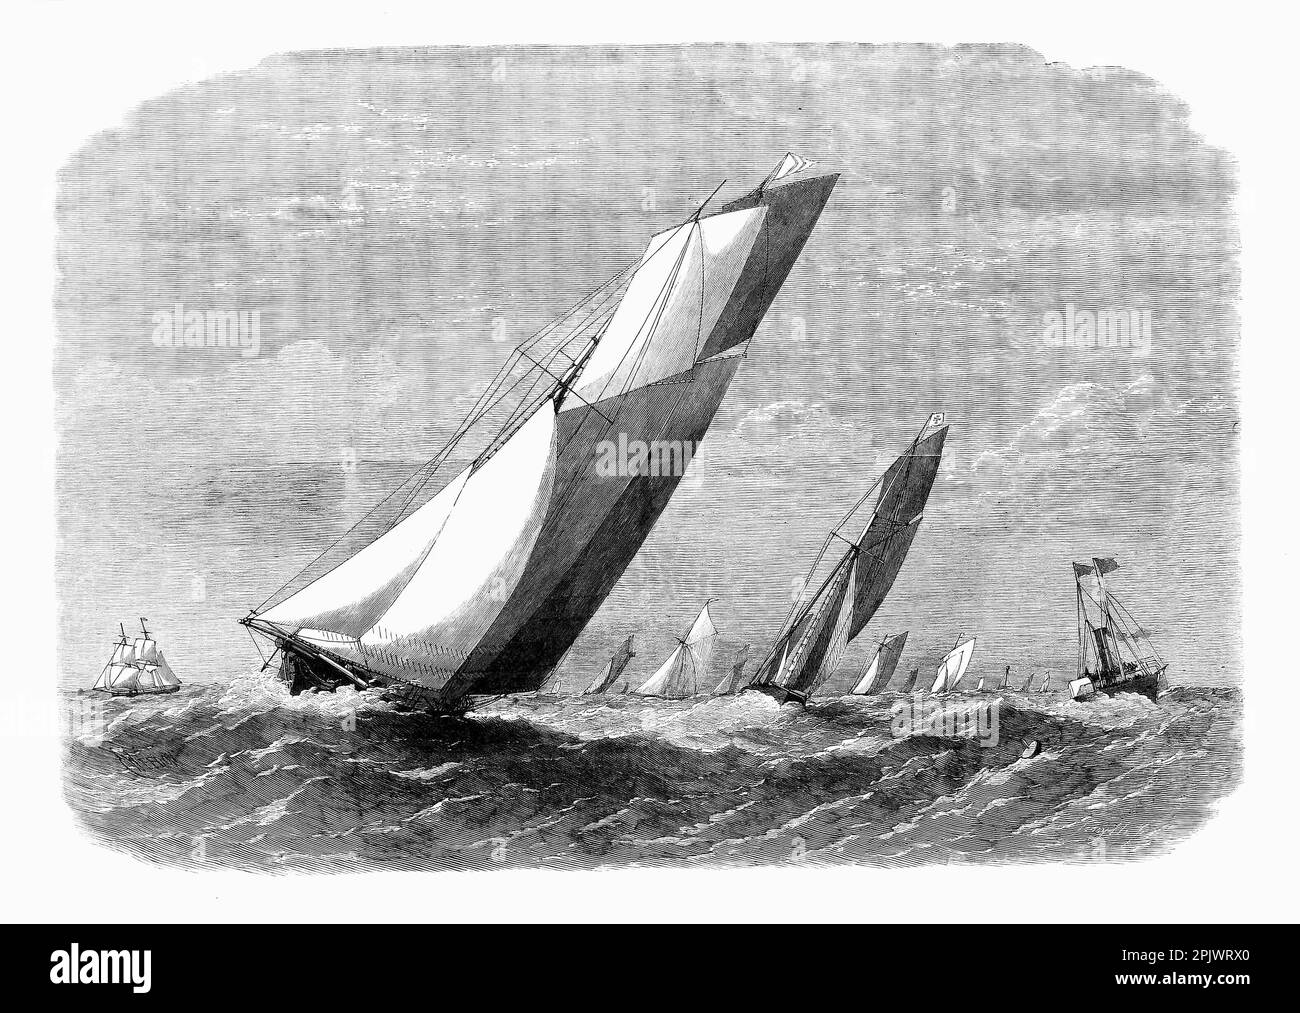 Yachts of the Royal Thames Yacht Club, the oldest continuously operating yacht club in the world, racing off the Kent coast in the summer of 1865 Stock Photo